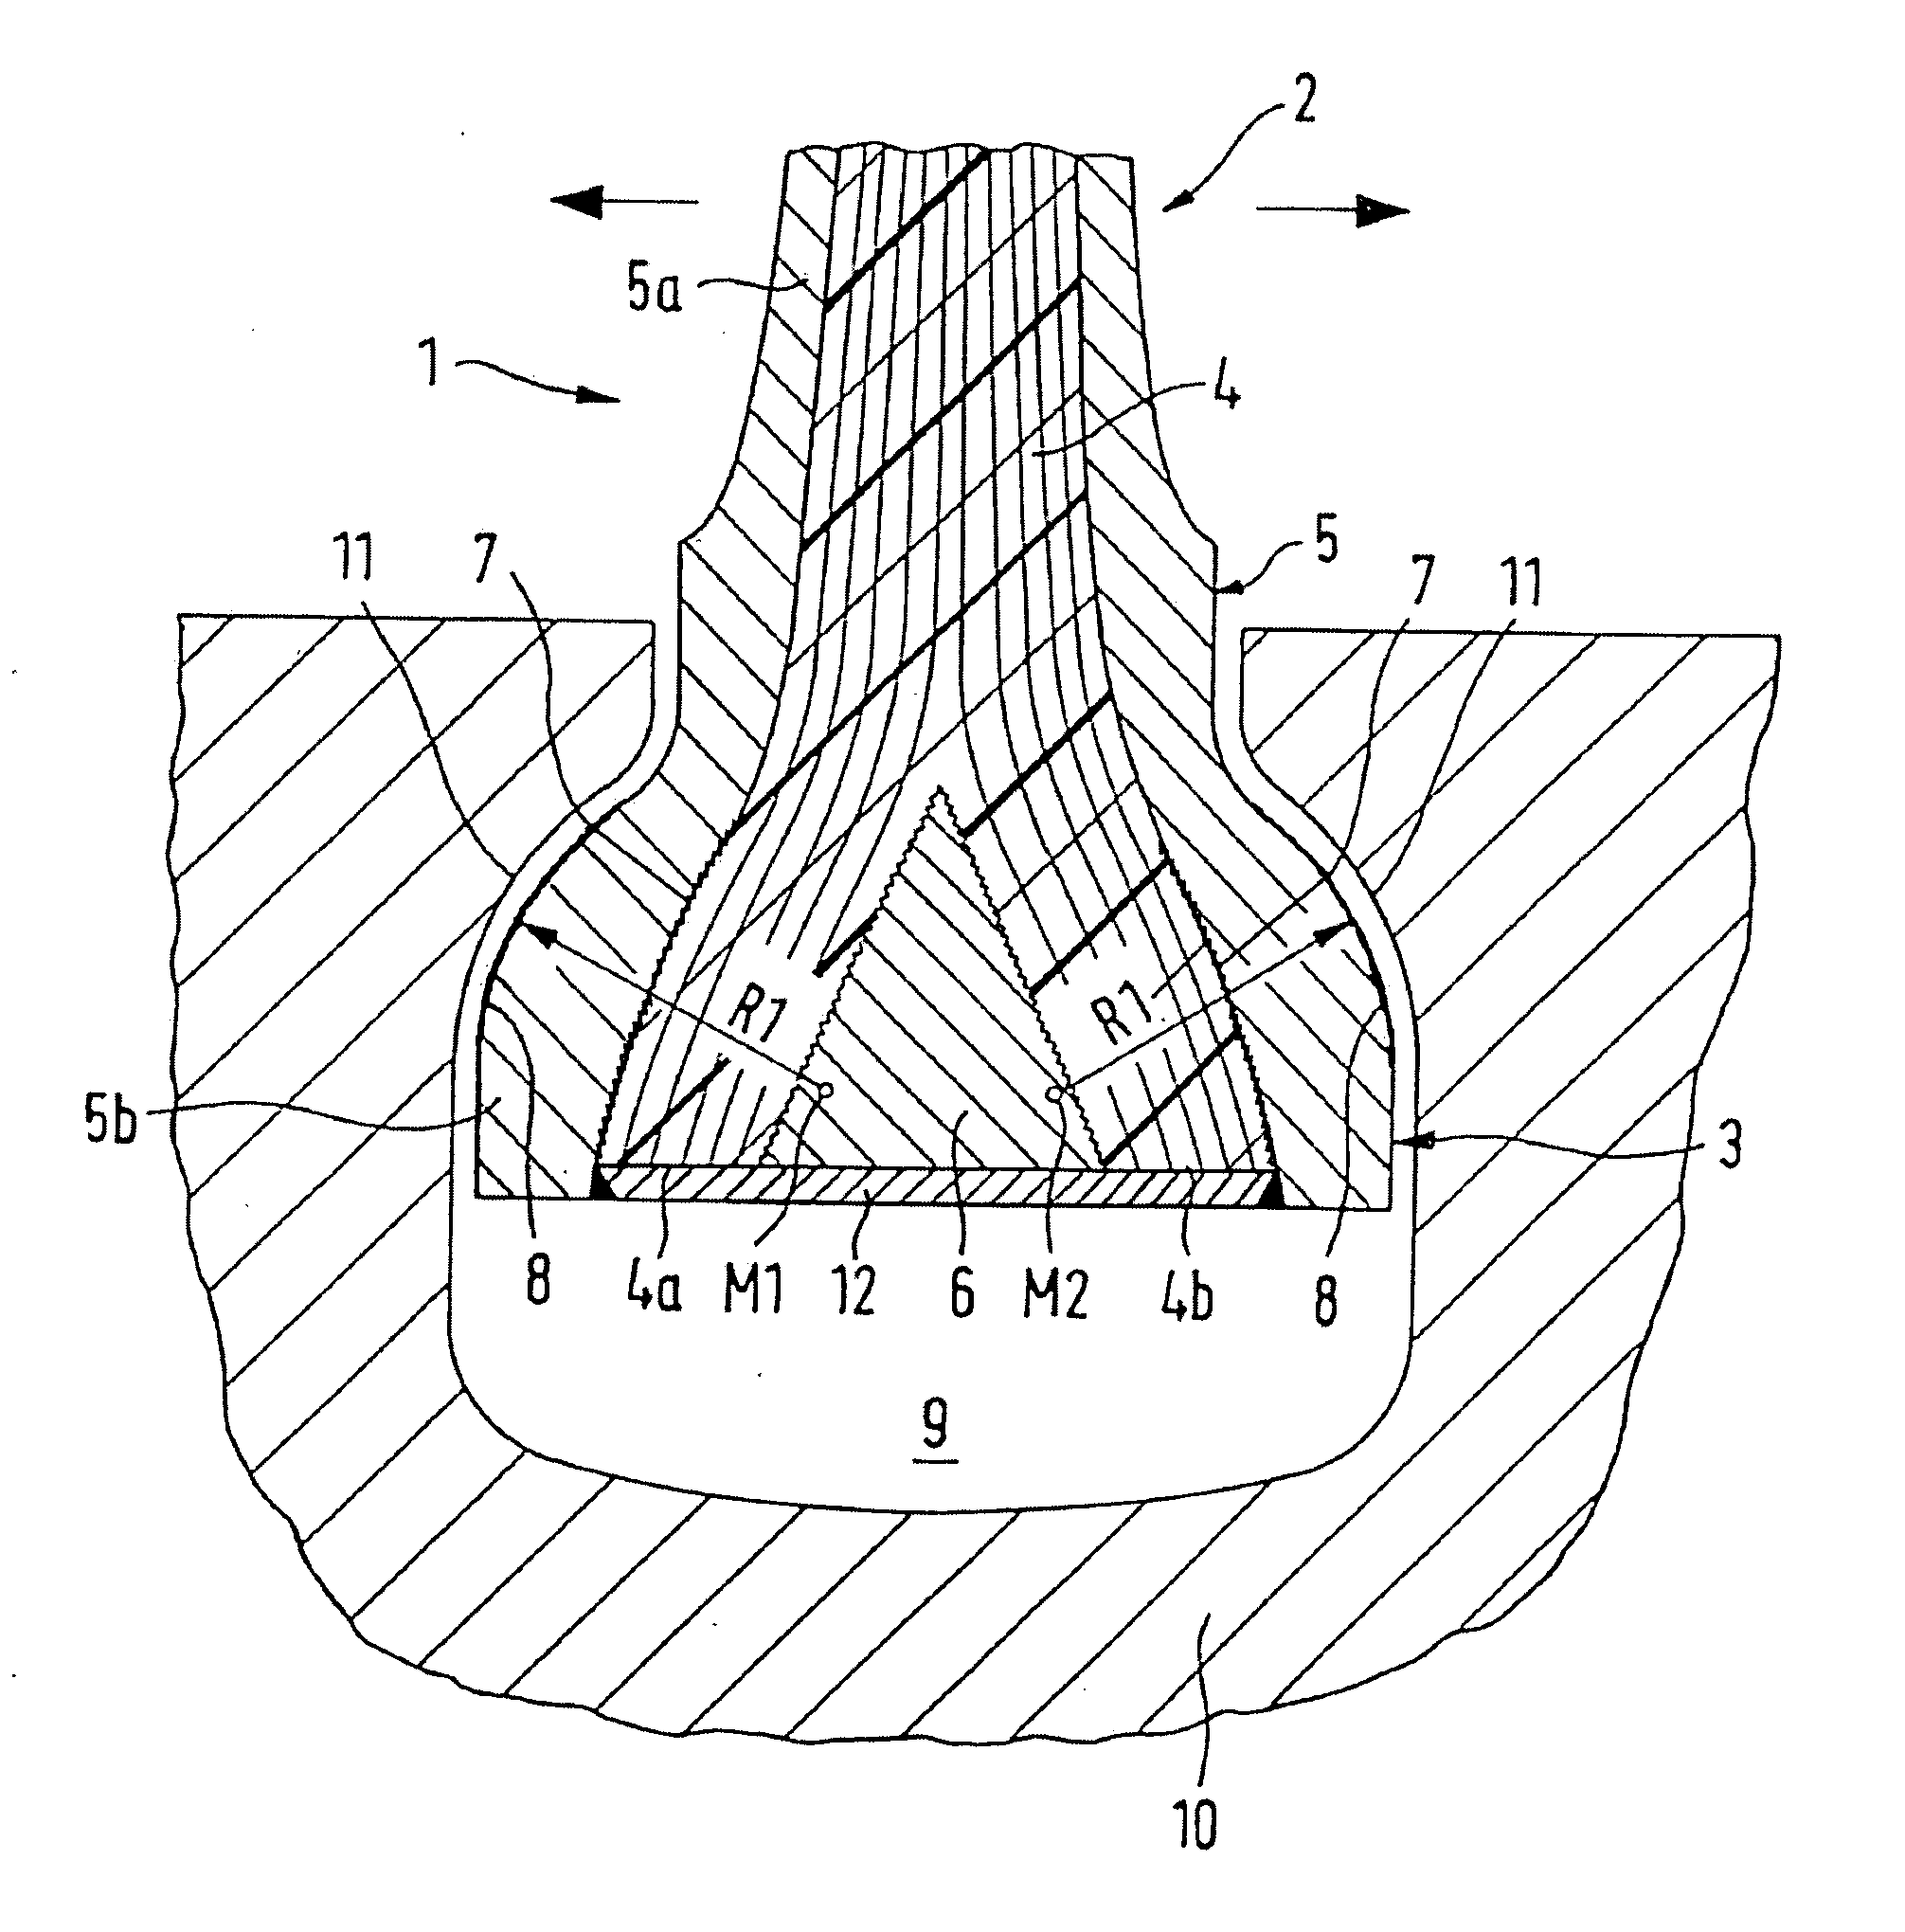 Compressor blade root for engine blades of aircraft engines